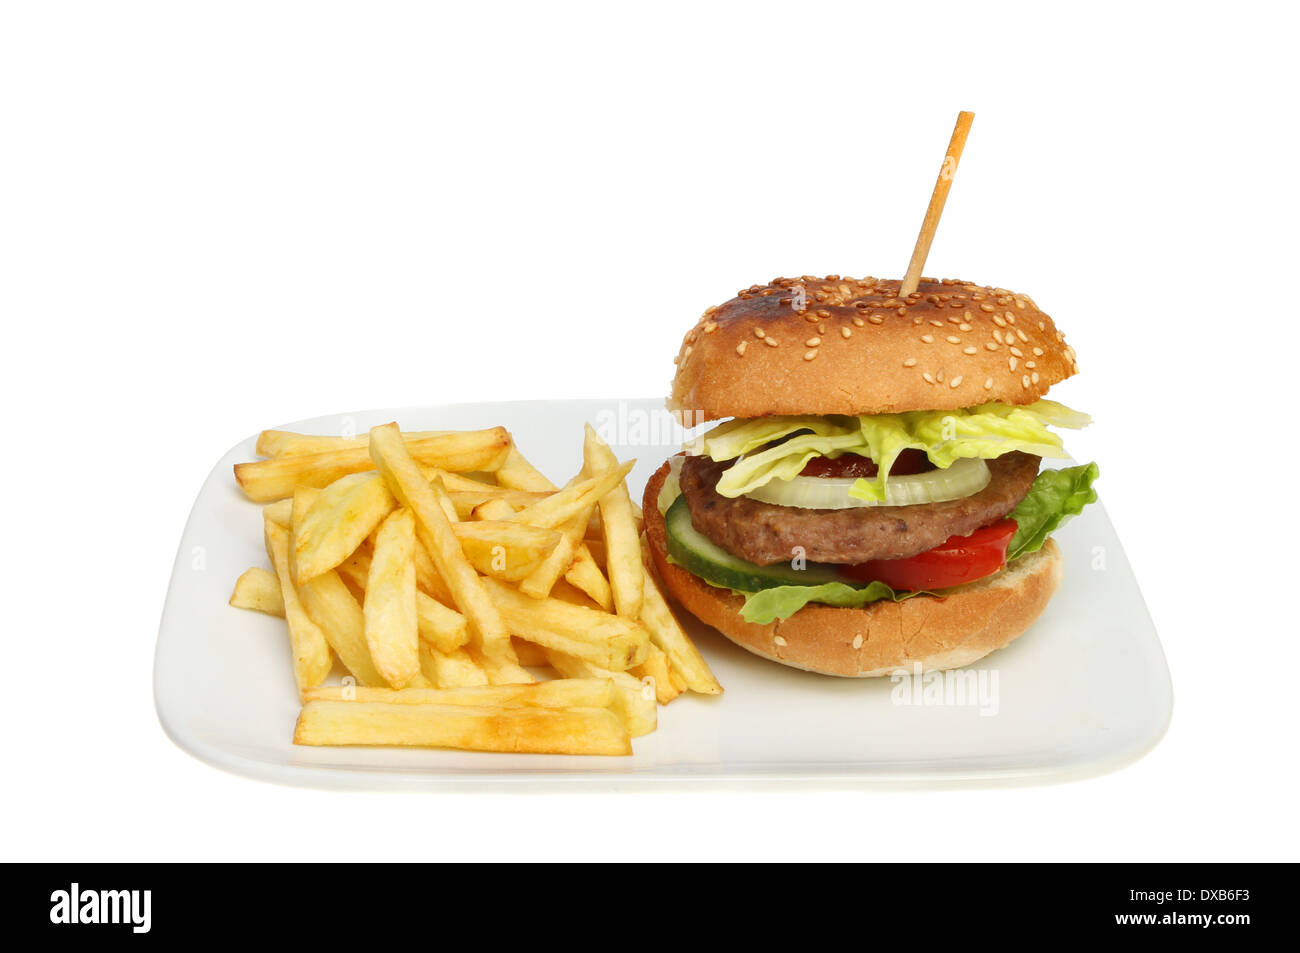 Beef burger and chips on a plate isolated against white Stock Photo